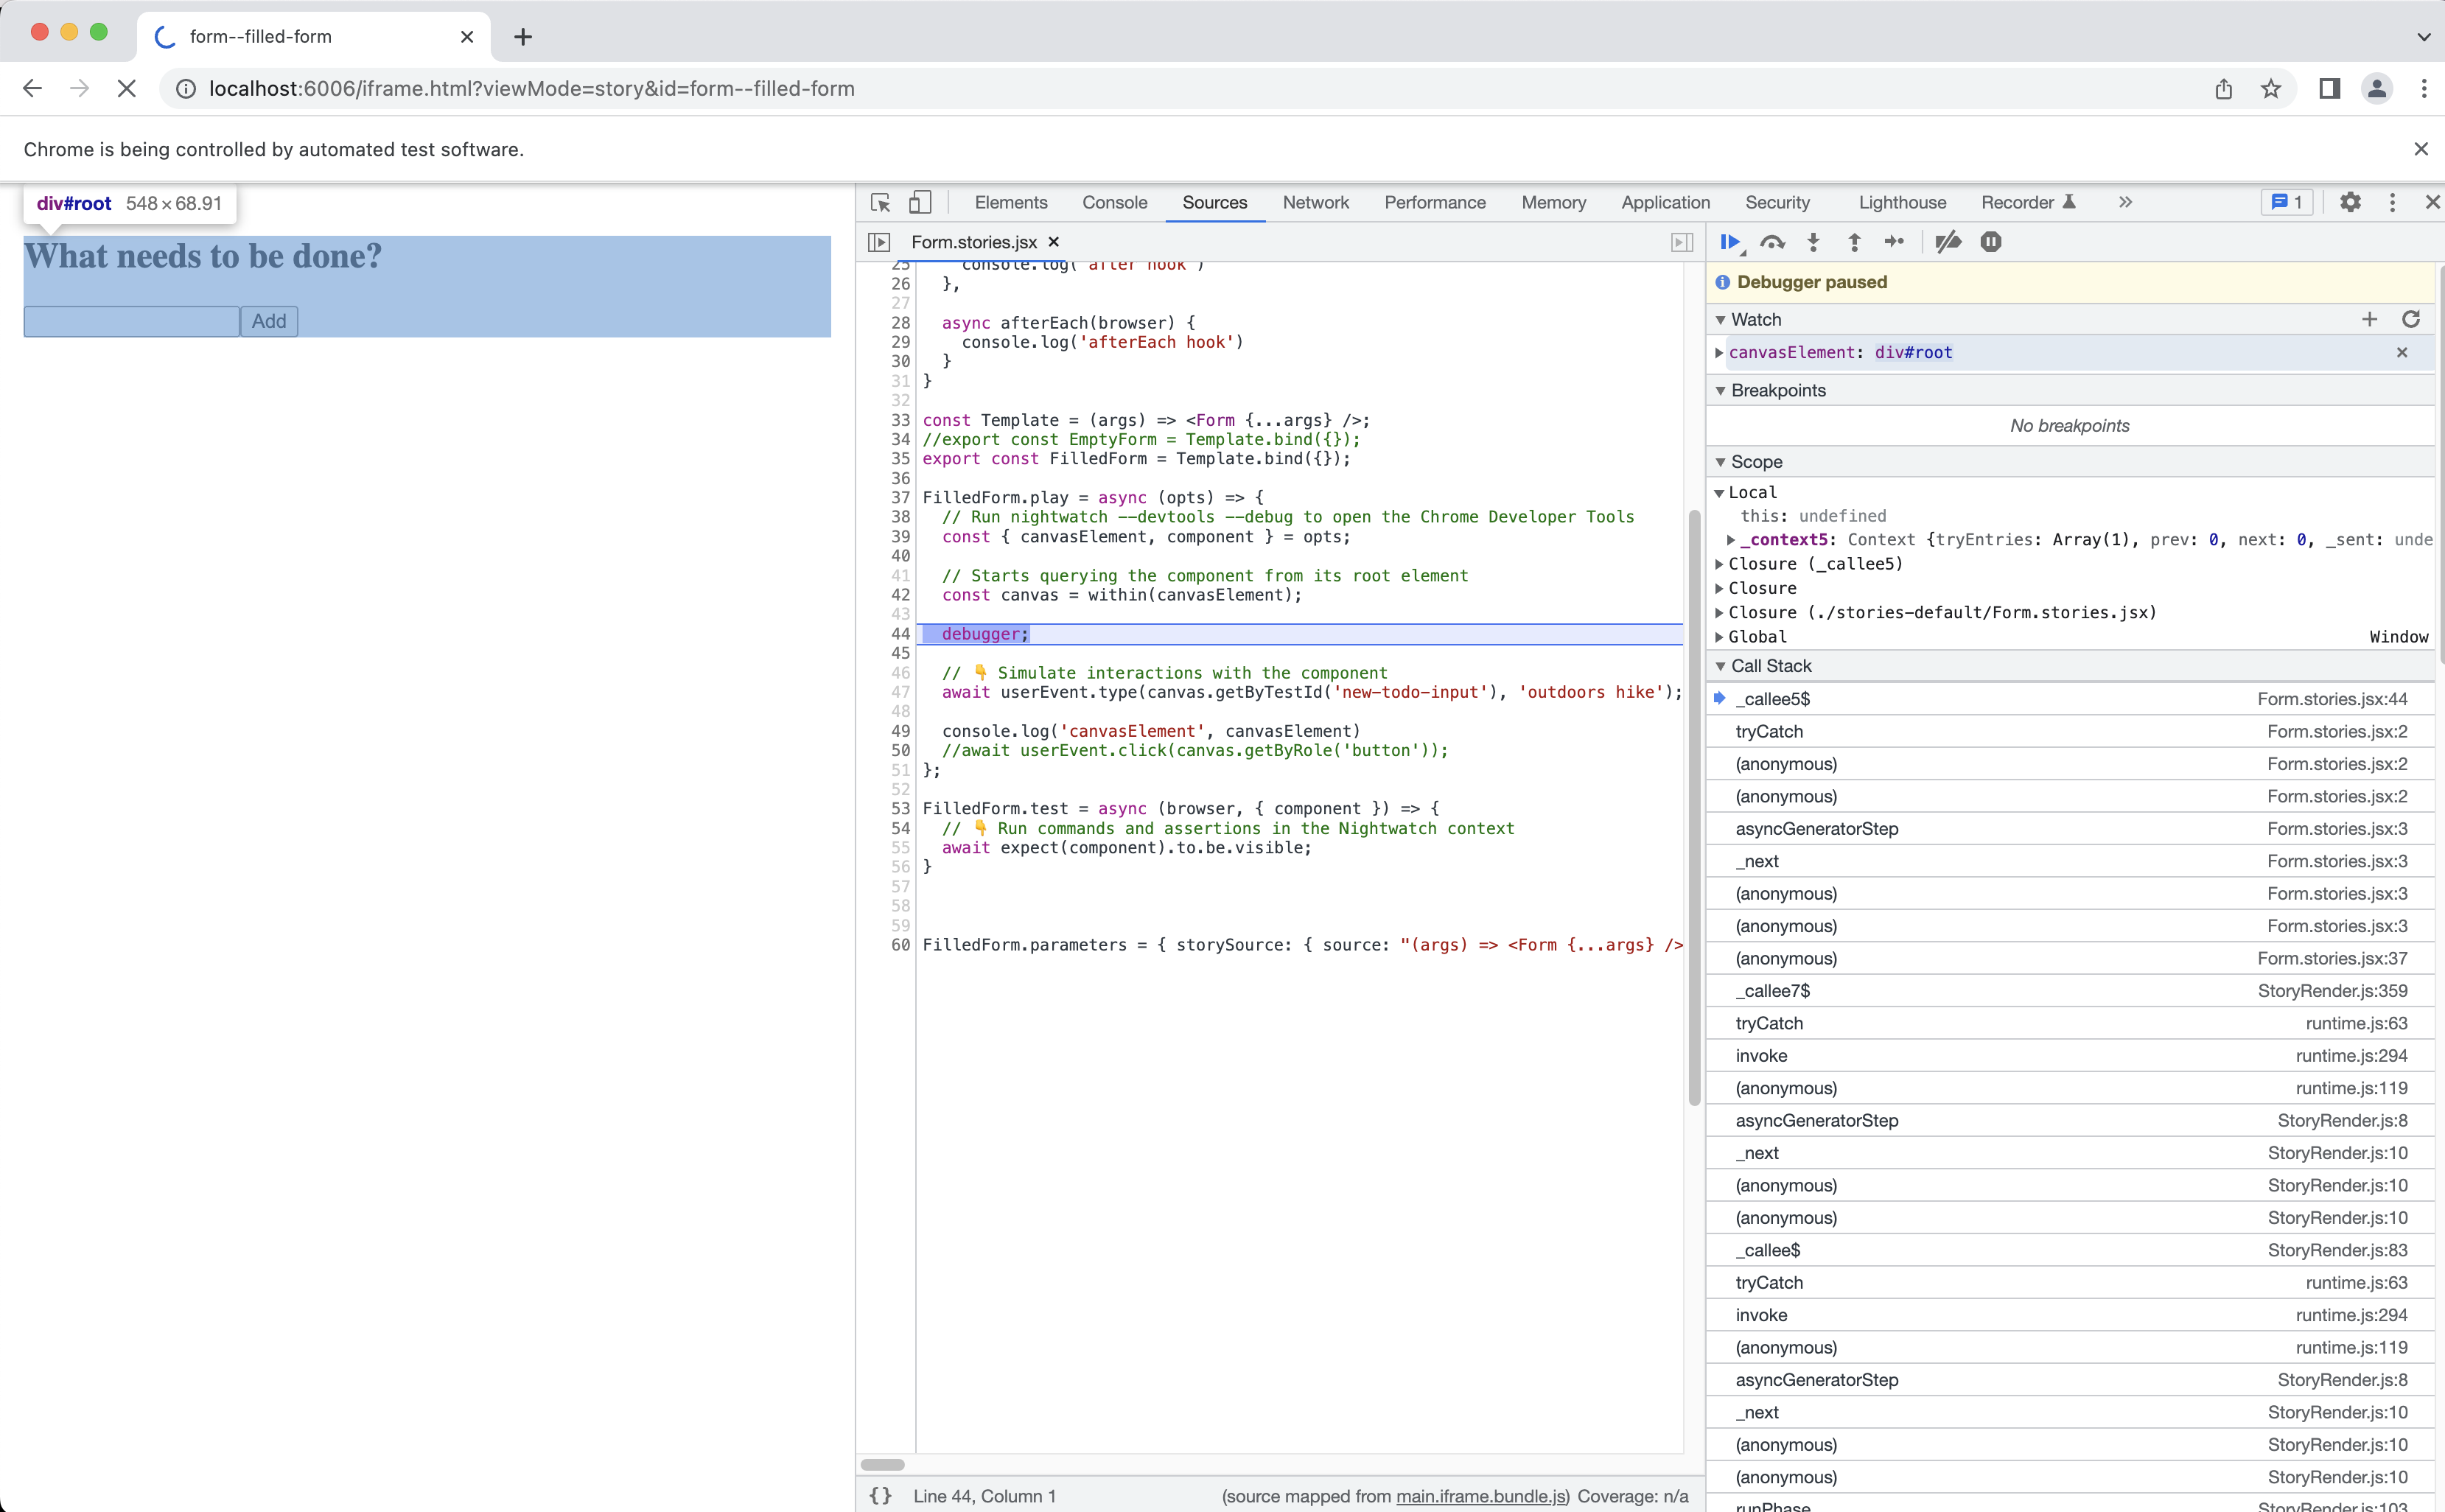 Screenshot of the Chrome Devtools debugger paused at a breakpoint